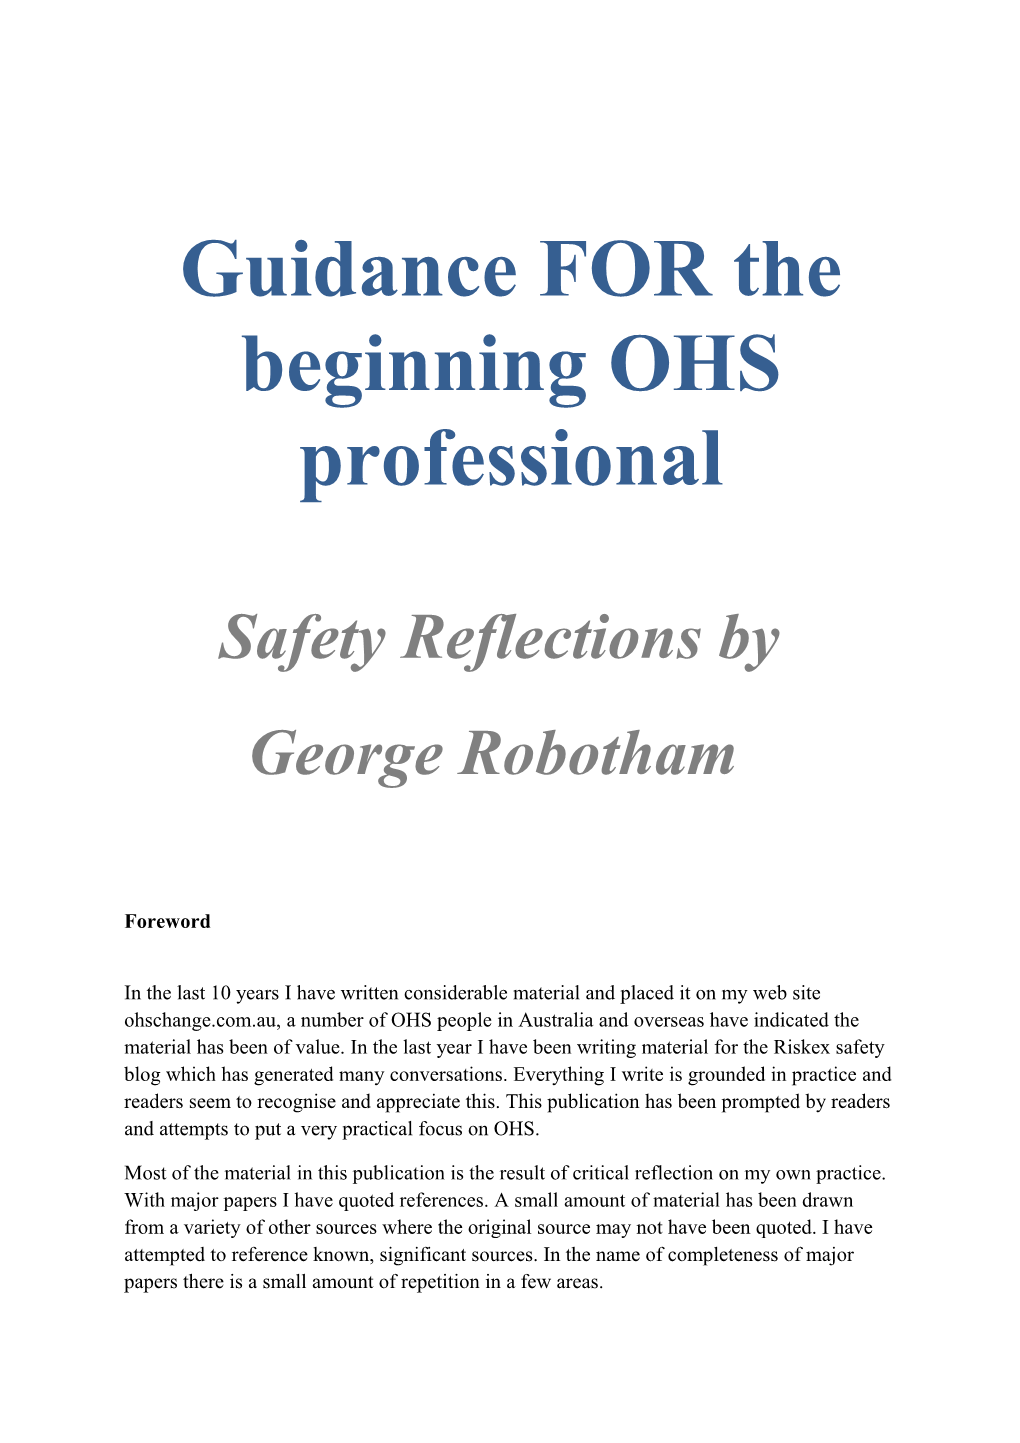 Guidance for the Beginning OHS Professional